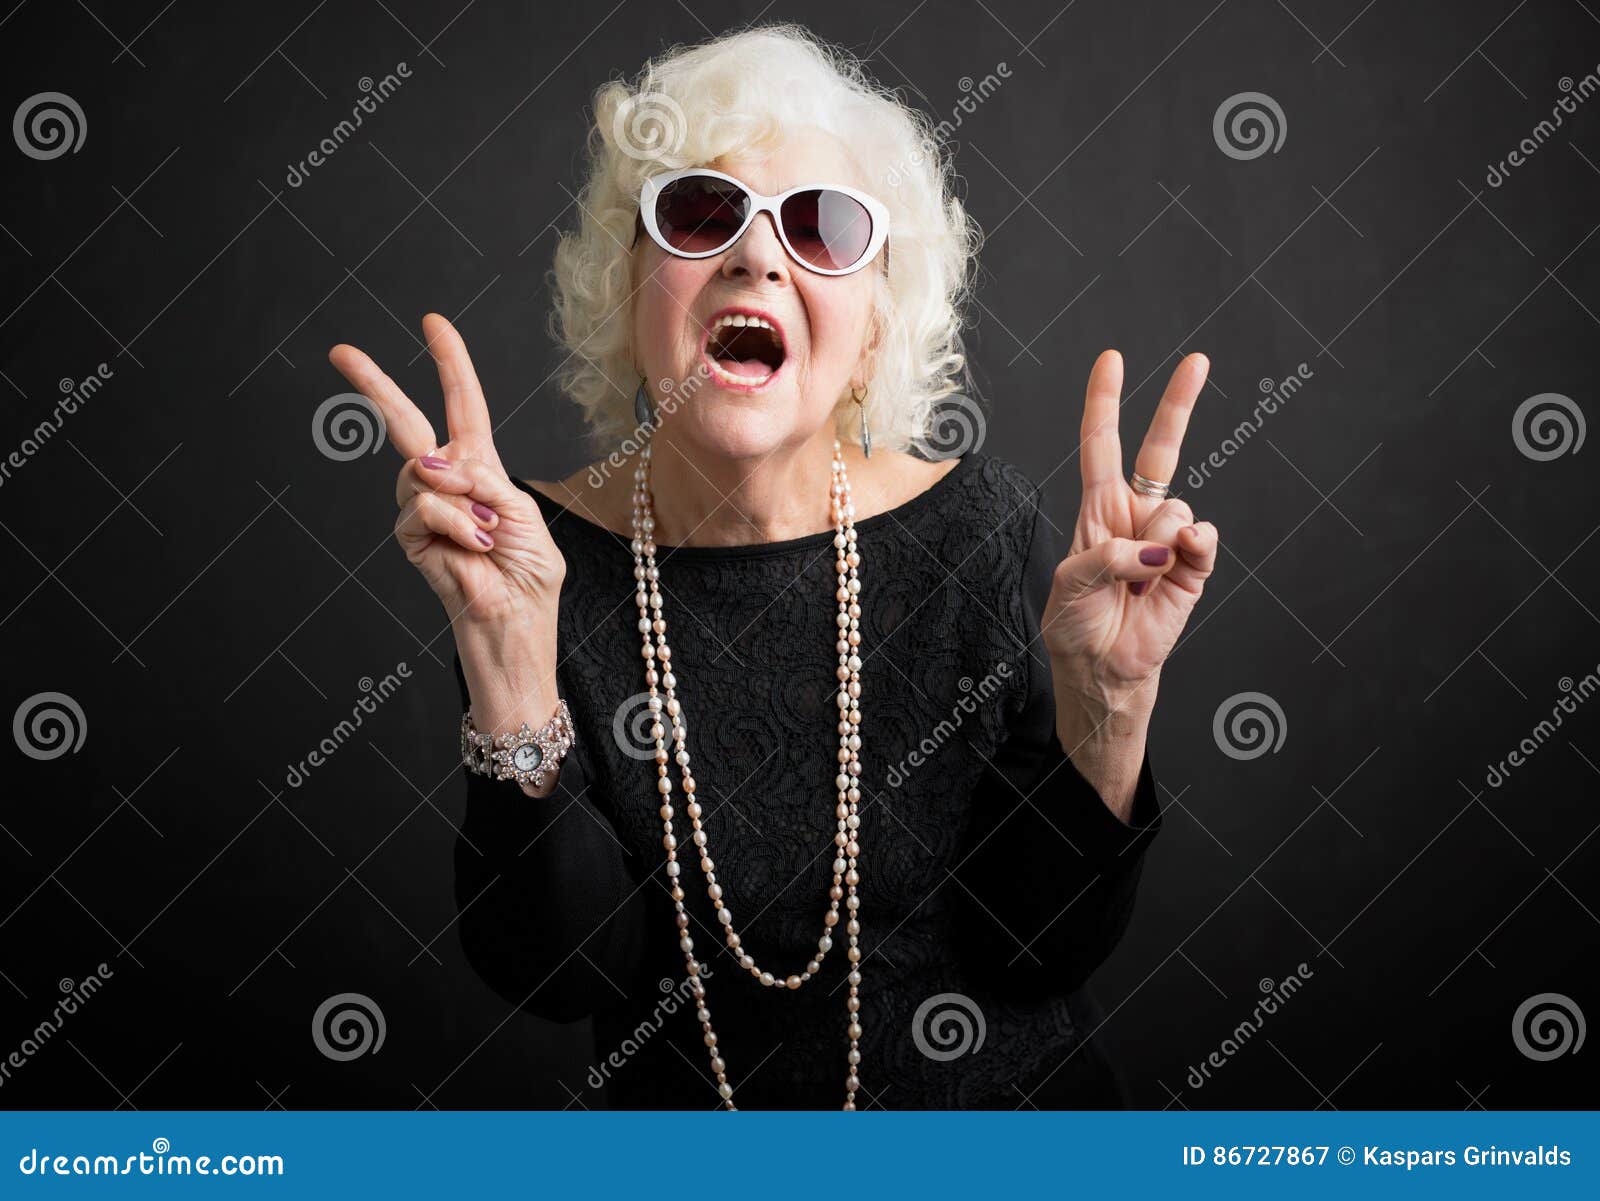 cool grandmother showing peace sign